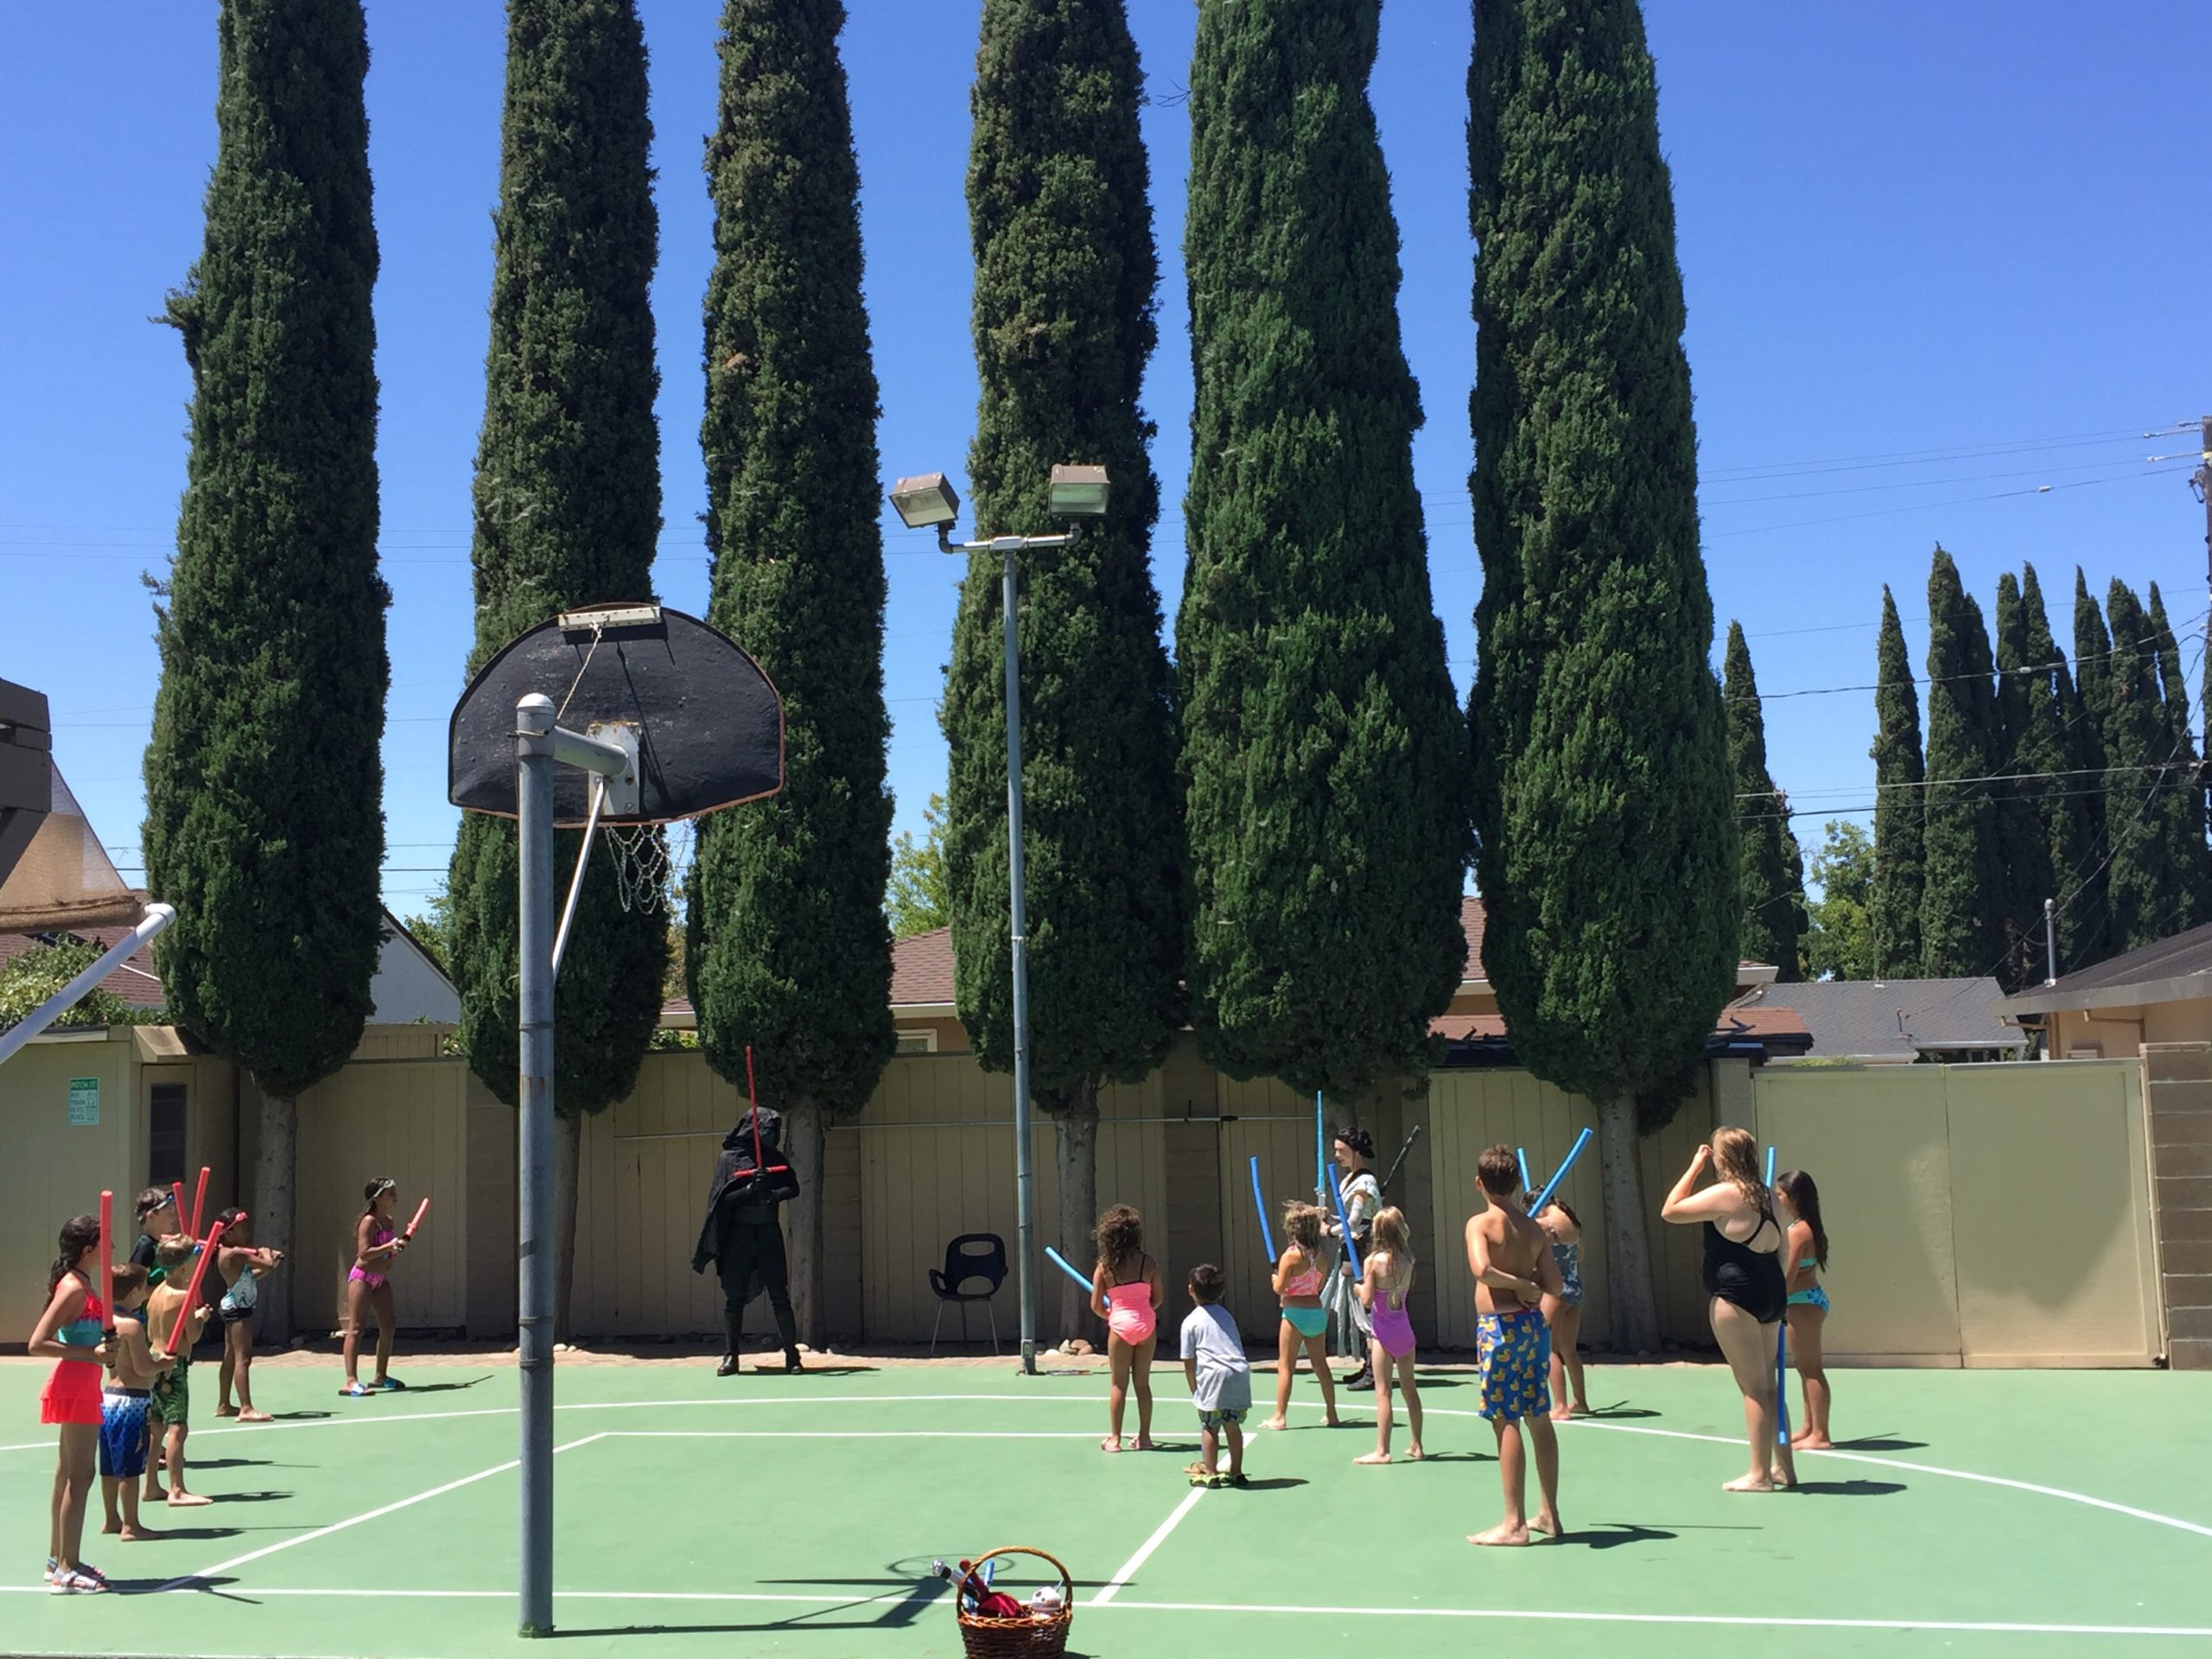 kids playing star wars on the basketball court for the birthday party